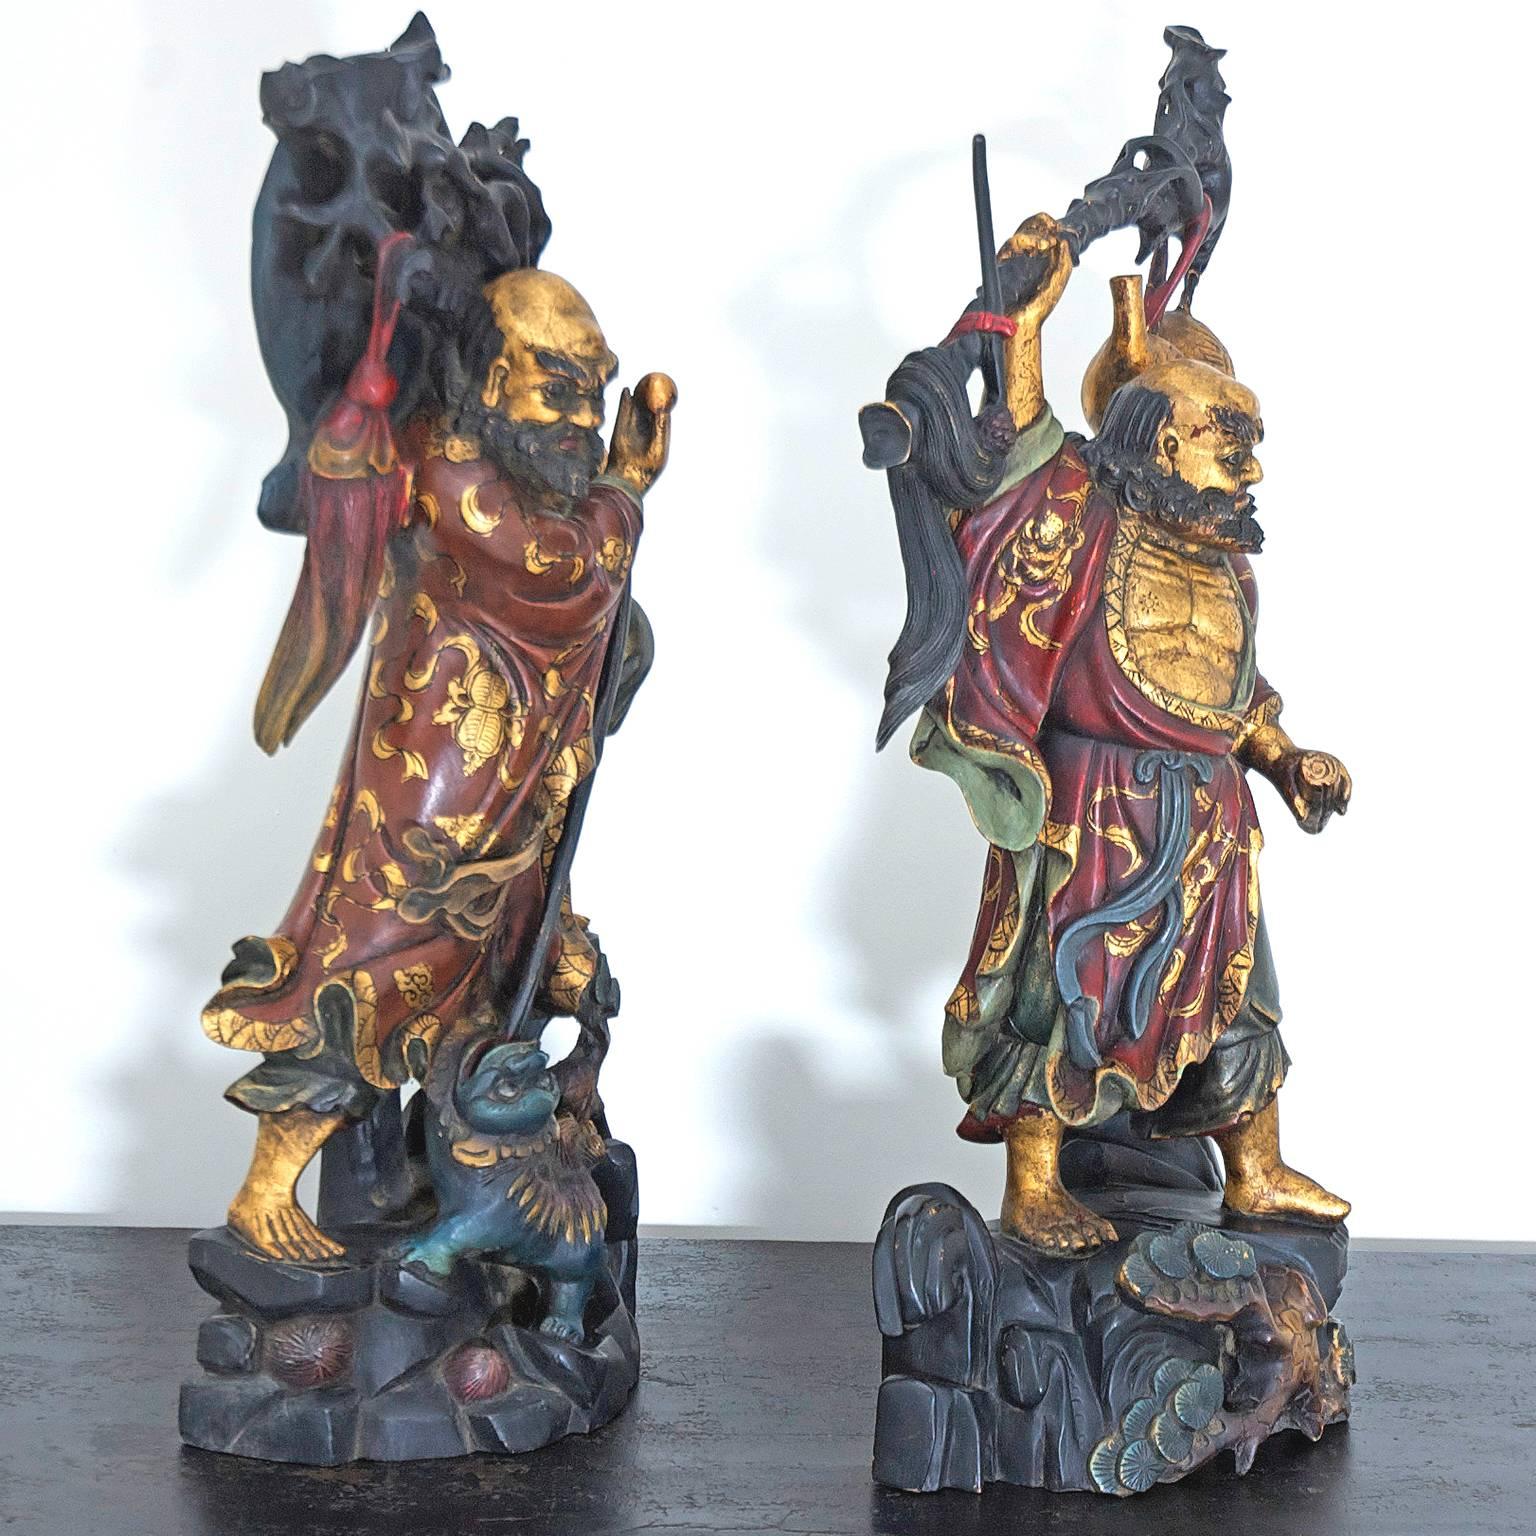 A pair of Chinese sculptures in the Ming style, expertly carved in wood with a polychrome finish, depicting bearded male figures in flowing robes holding branches over their shoulders on a rocky base. China, early 1900’s, or possibly late